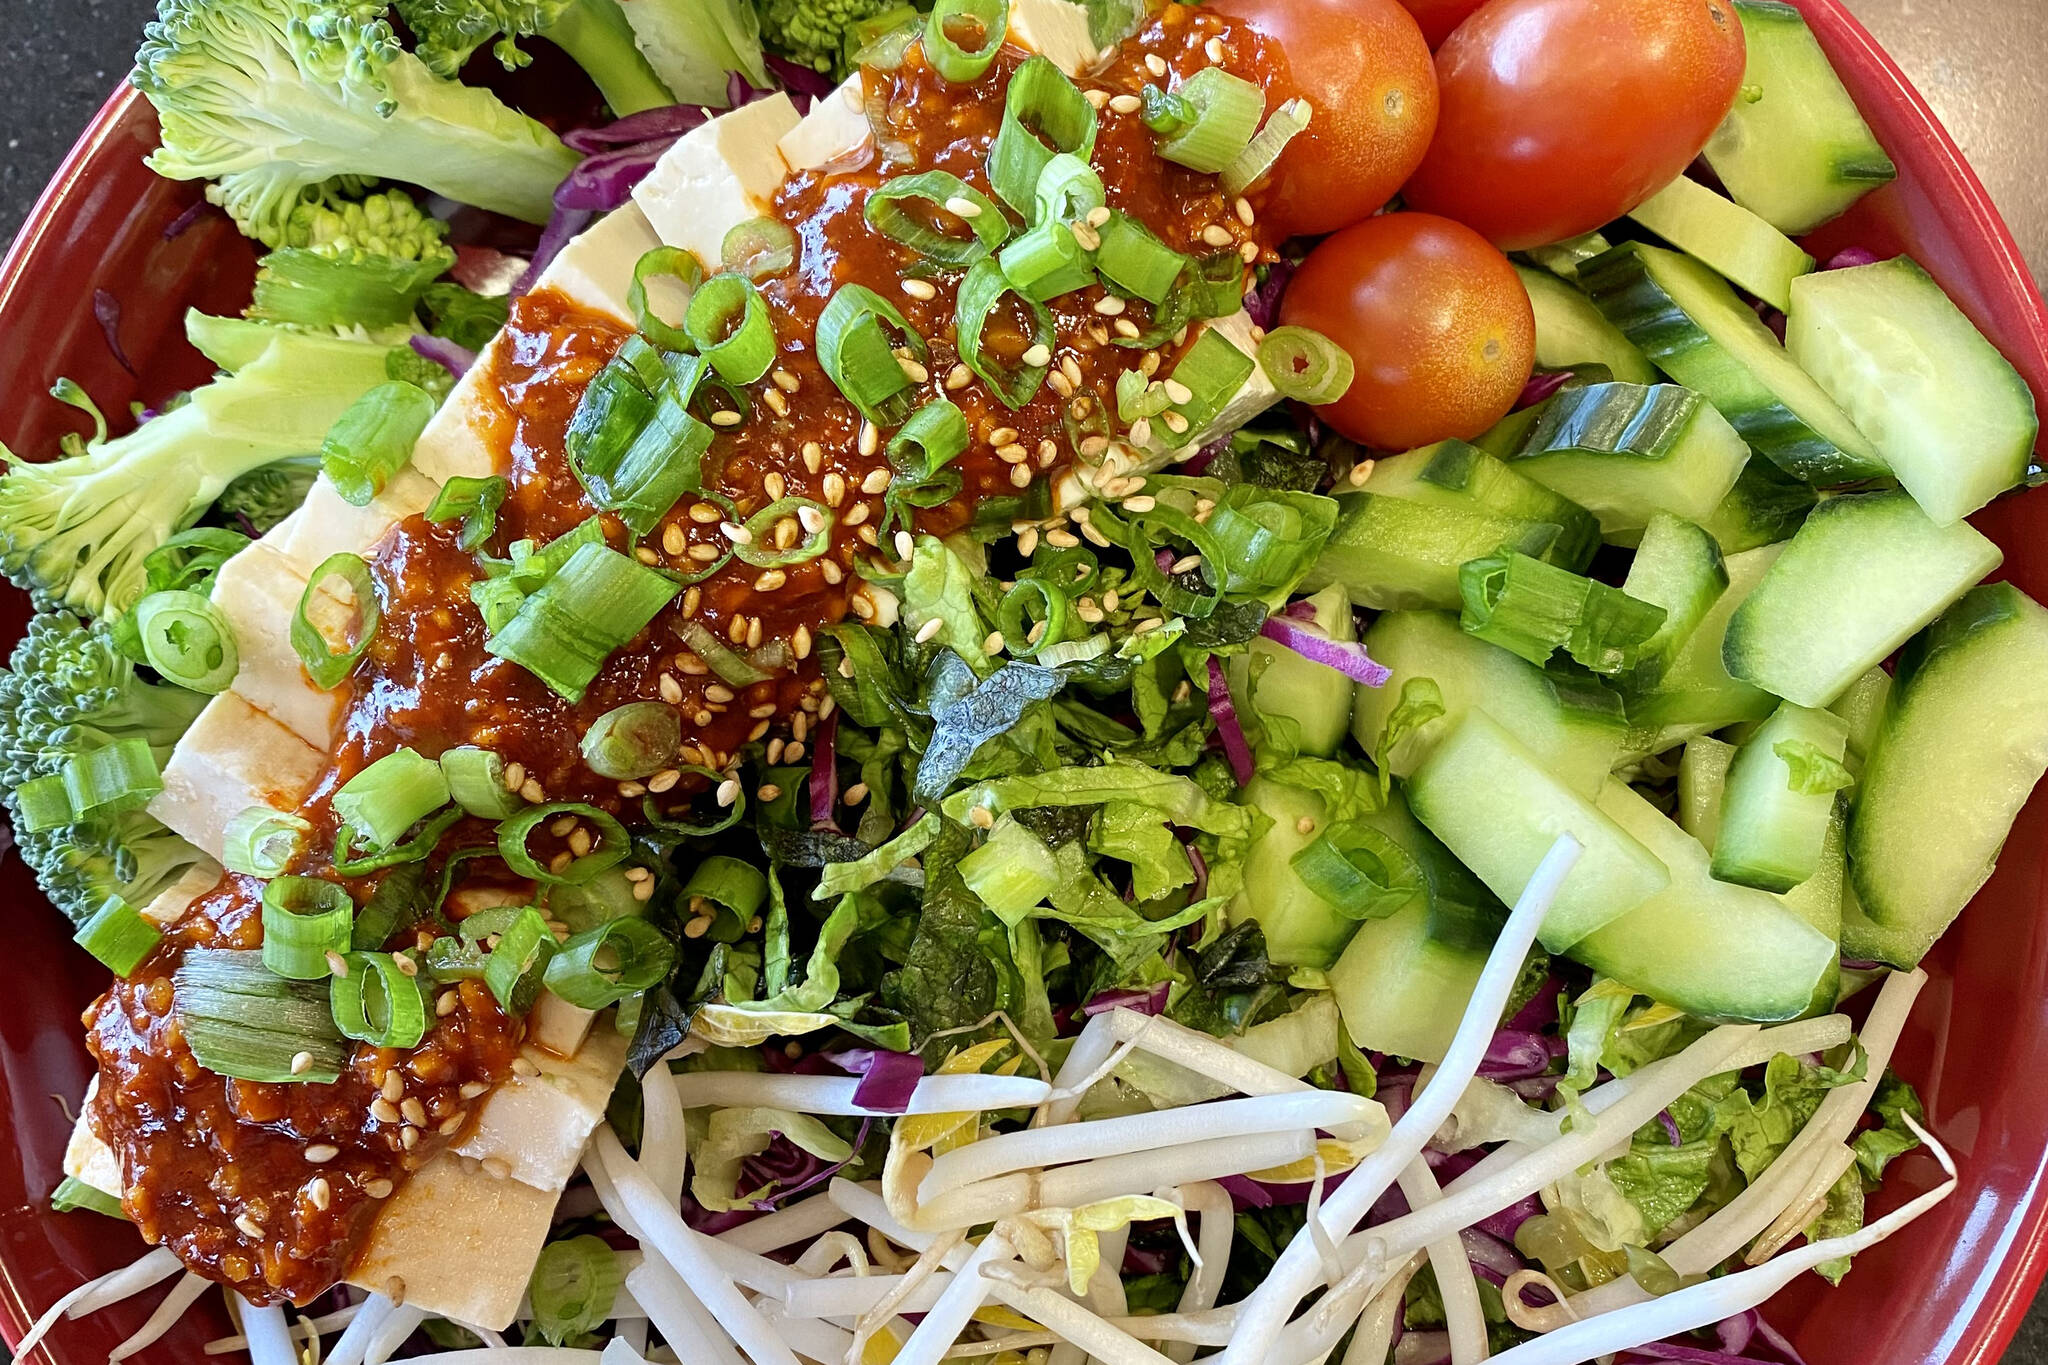 Gochujang dressing spices up tofu, lettuce, veggies and sprouts. (Photo by Tressa Dale/Peninsula Clarion)